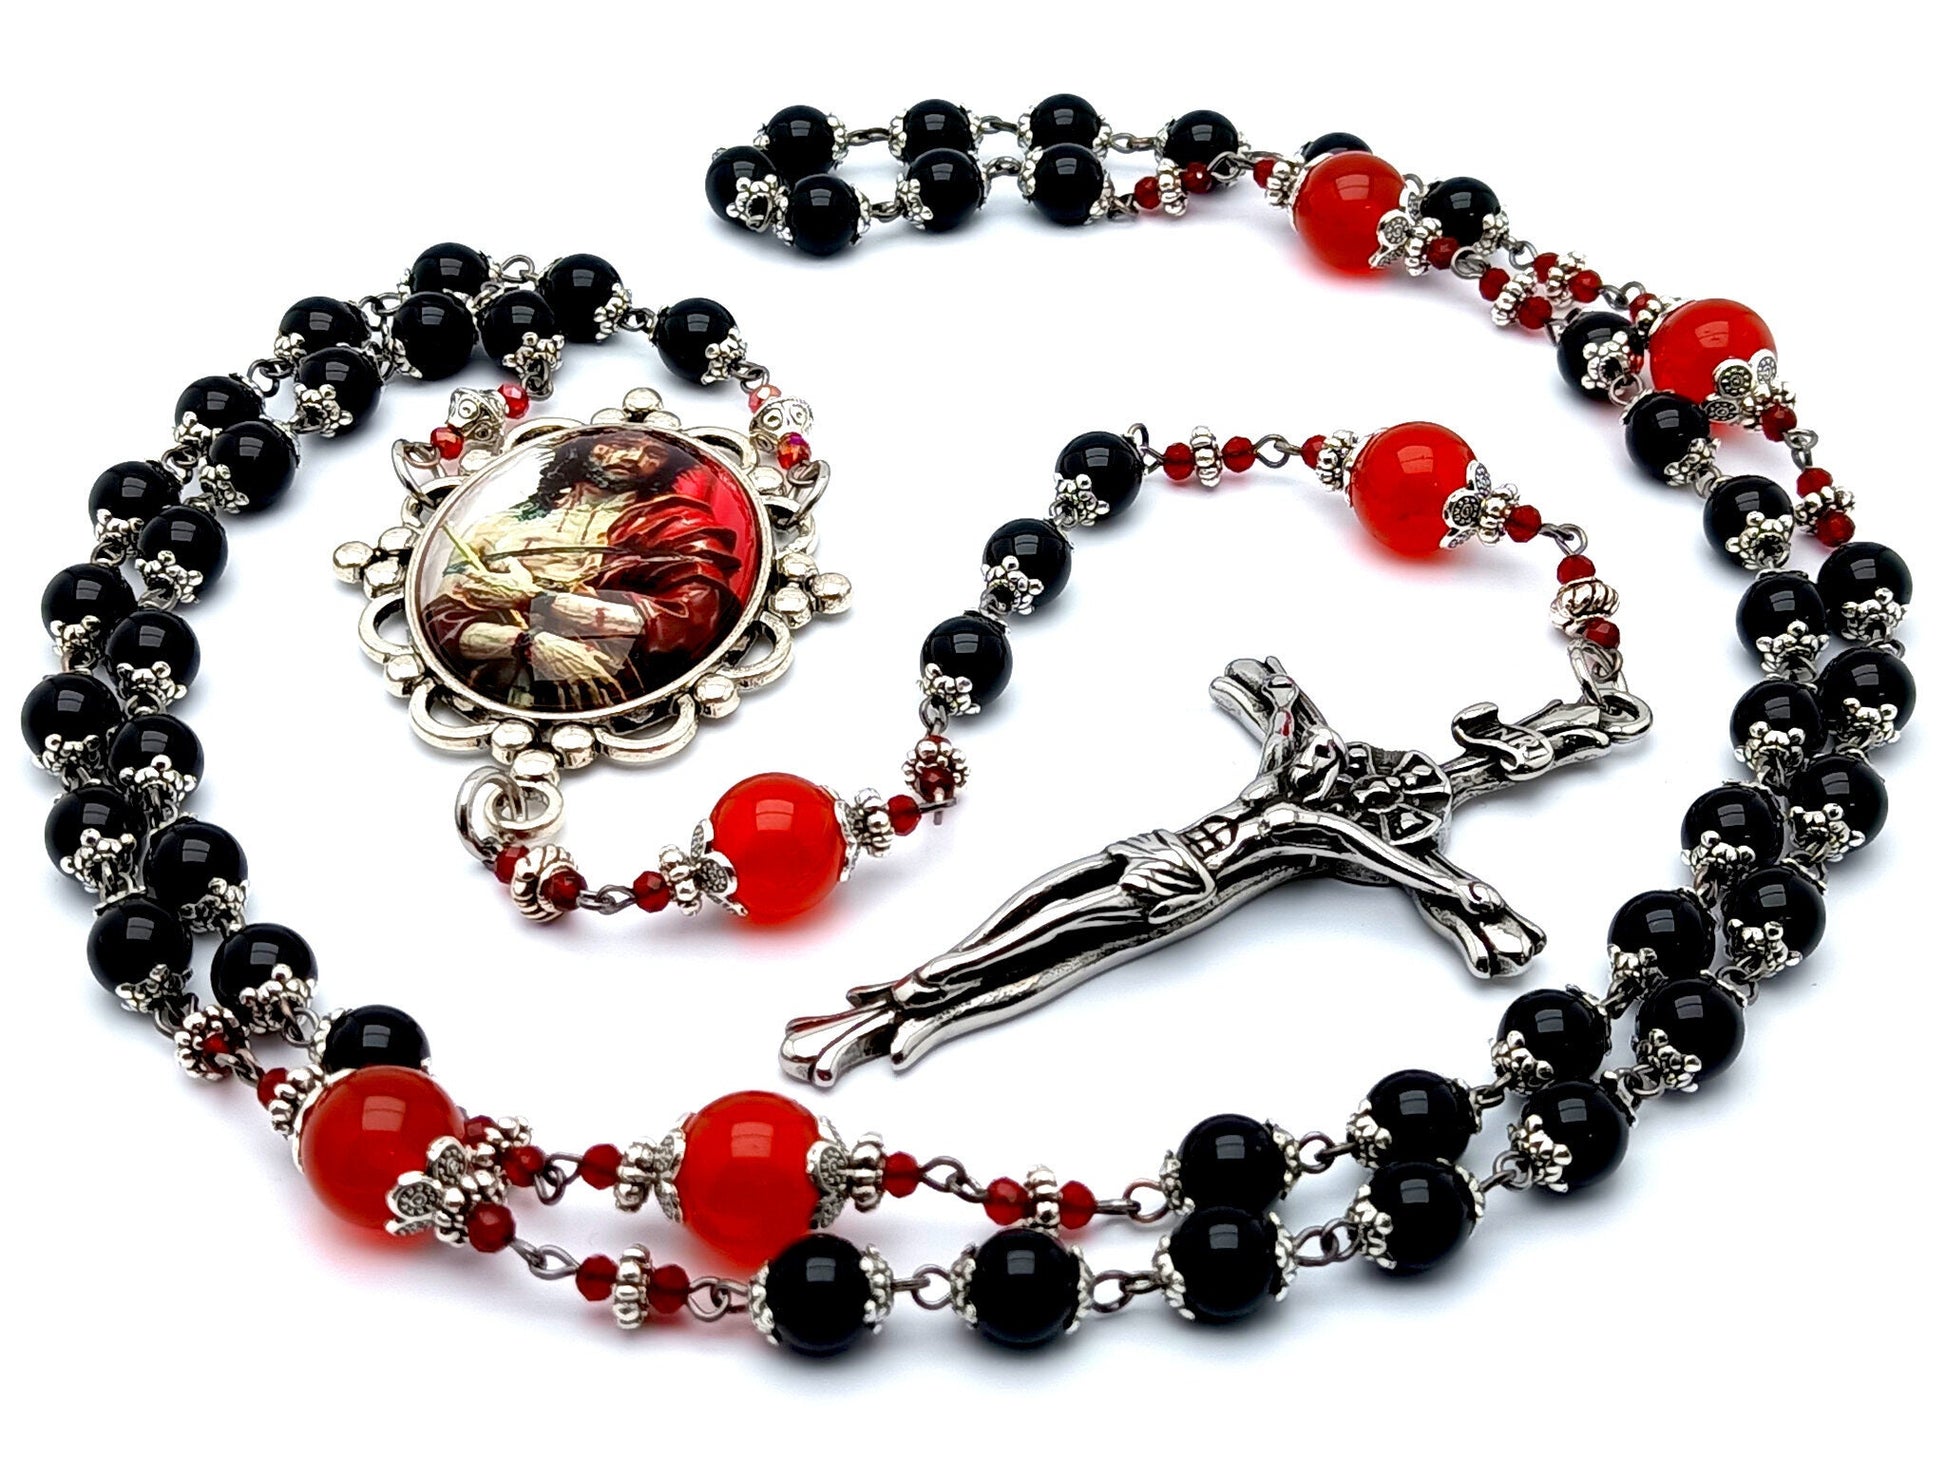 The Crucifixion unique rosary beads with onyx and ruby gemstone beads and stainless steel crucifix.